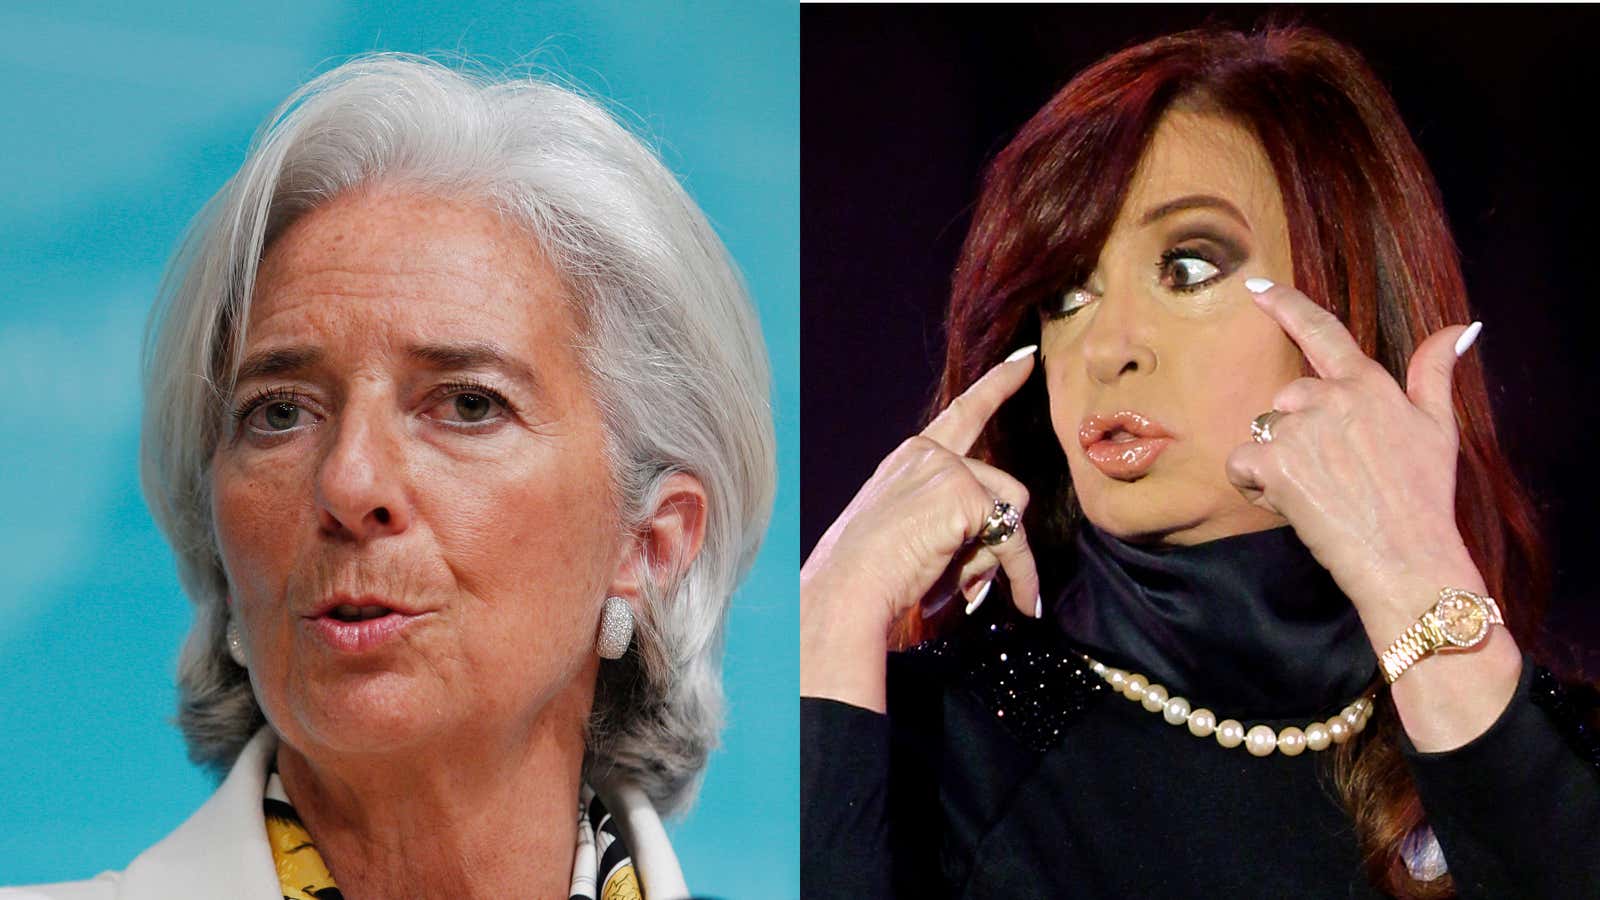 IMF Managing Director Christine Lagarde (L) and Argentine President Cristina Kirchner (R) have found something they can see eye to eye about.